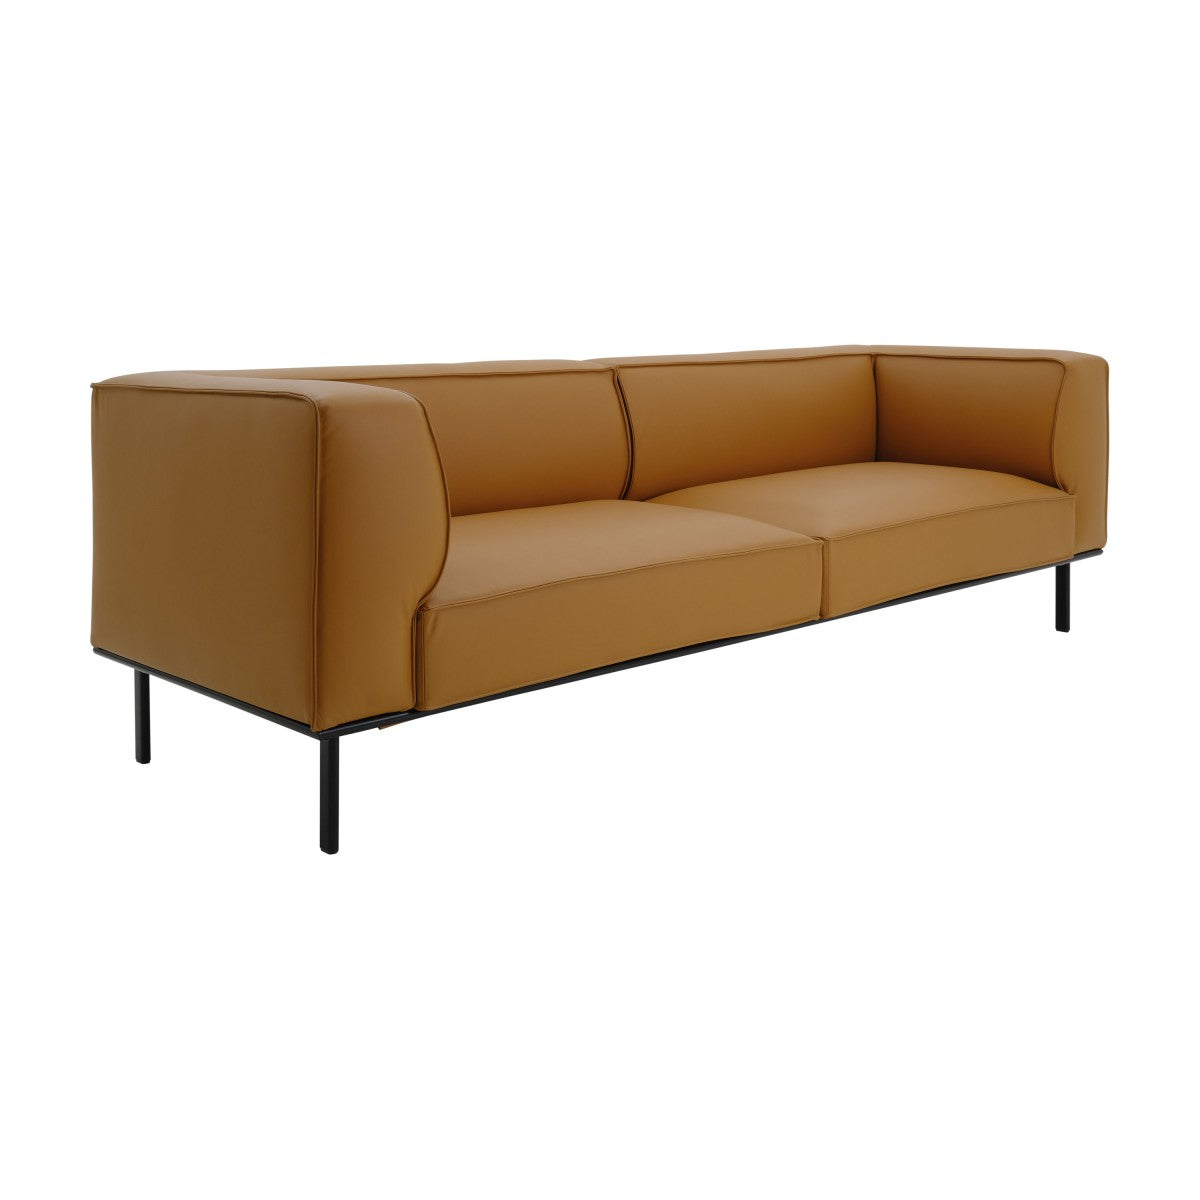 Diplo Bespoke Upholstered Modern Style Five Seater Sofa MS9031G Custom Made To Order